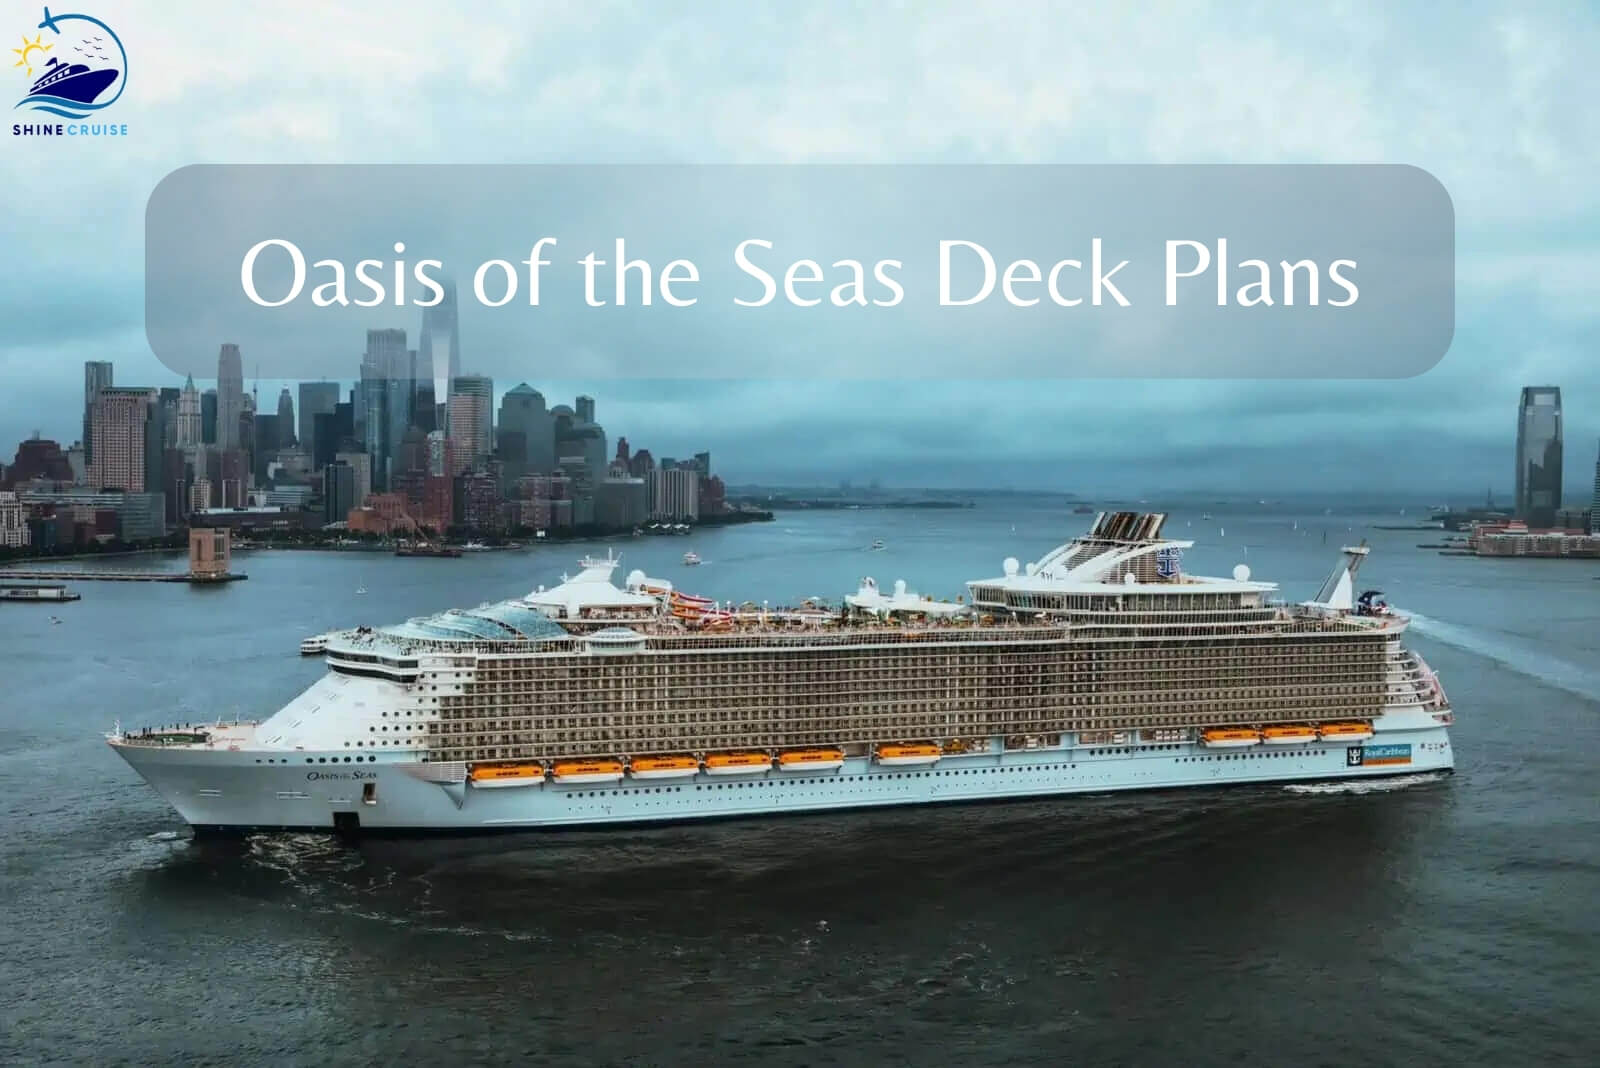 Oasis of the Seas Deck Plans